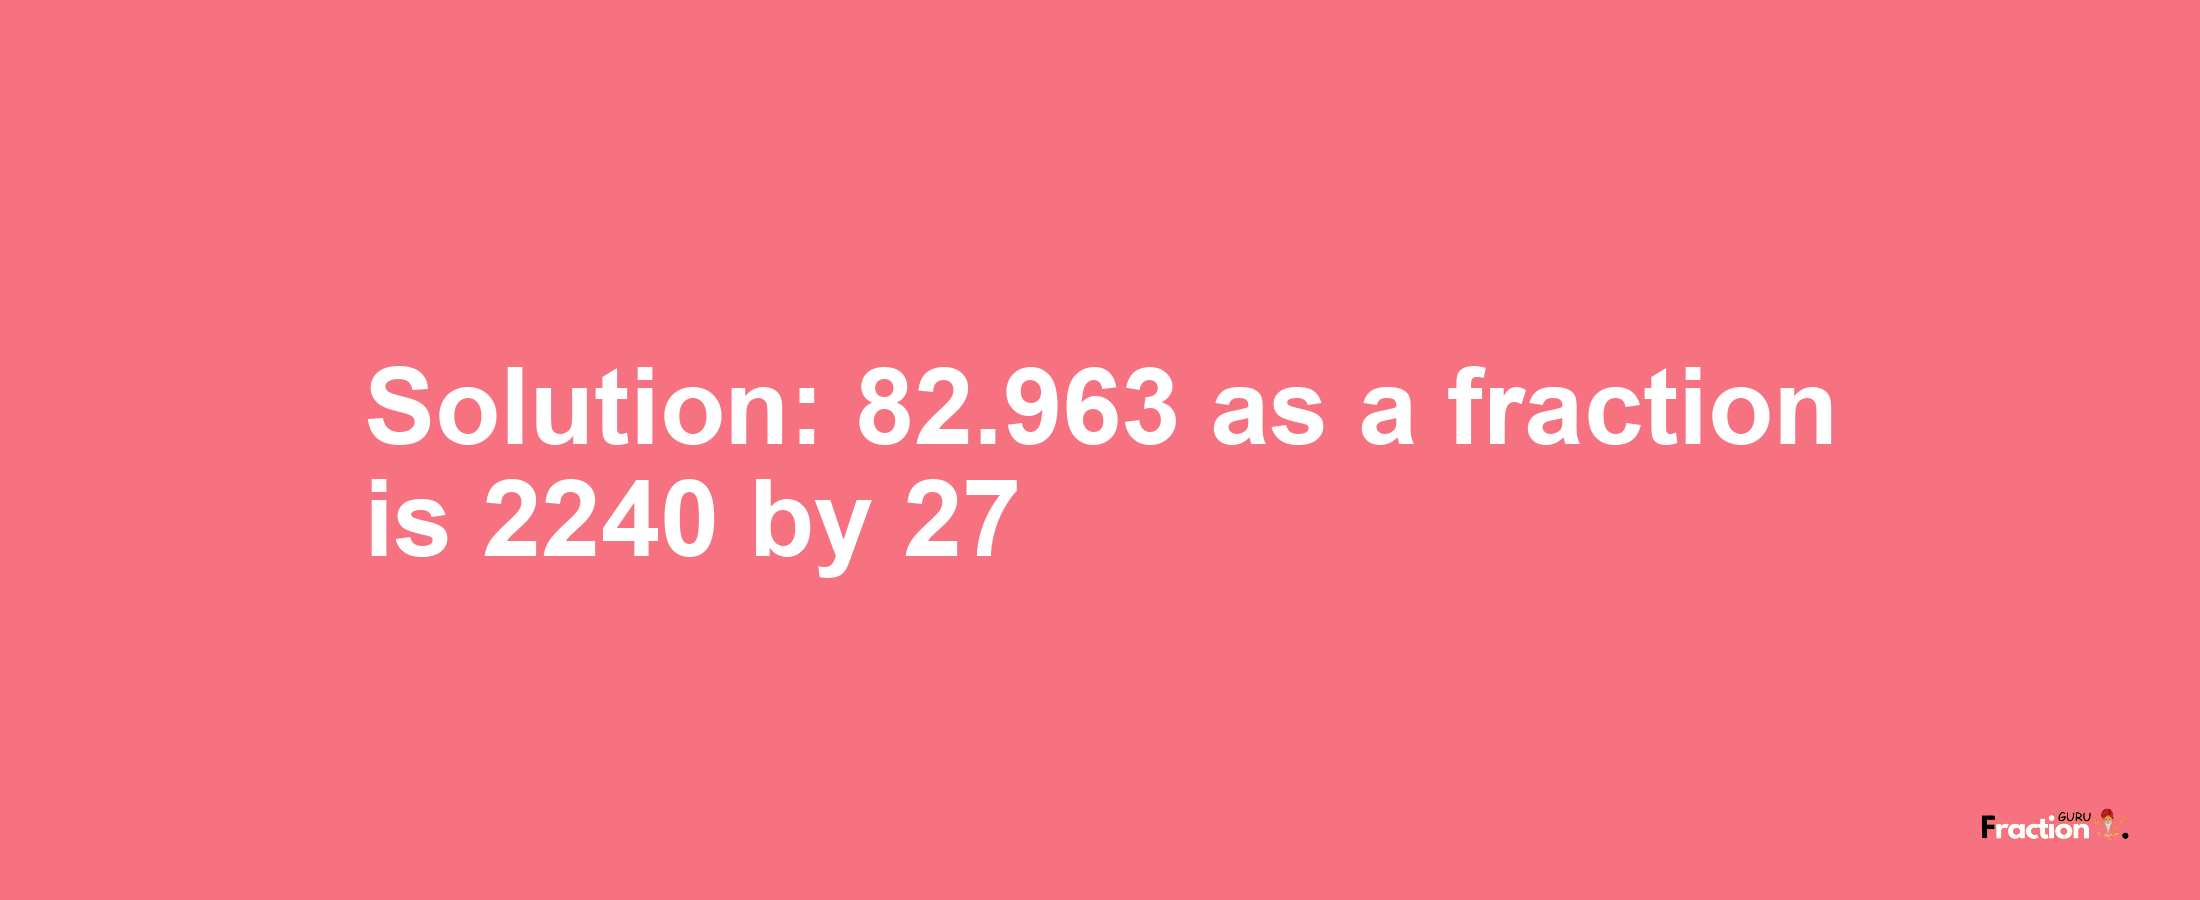 Solution:82.963 as a fraction is 2240/27